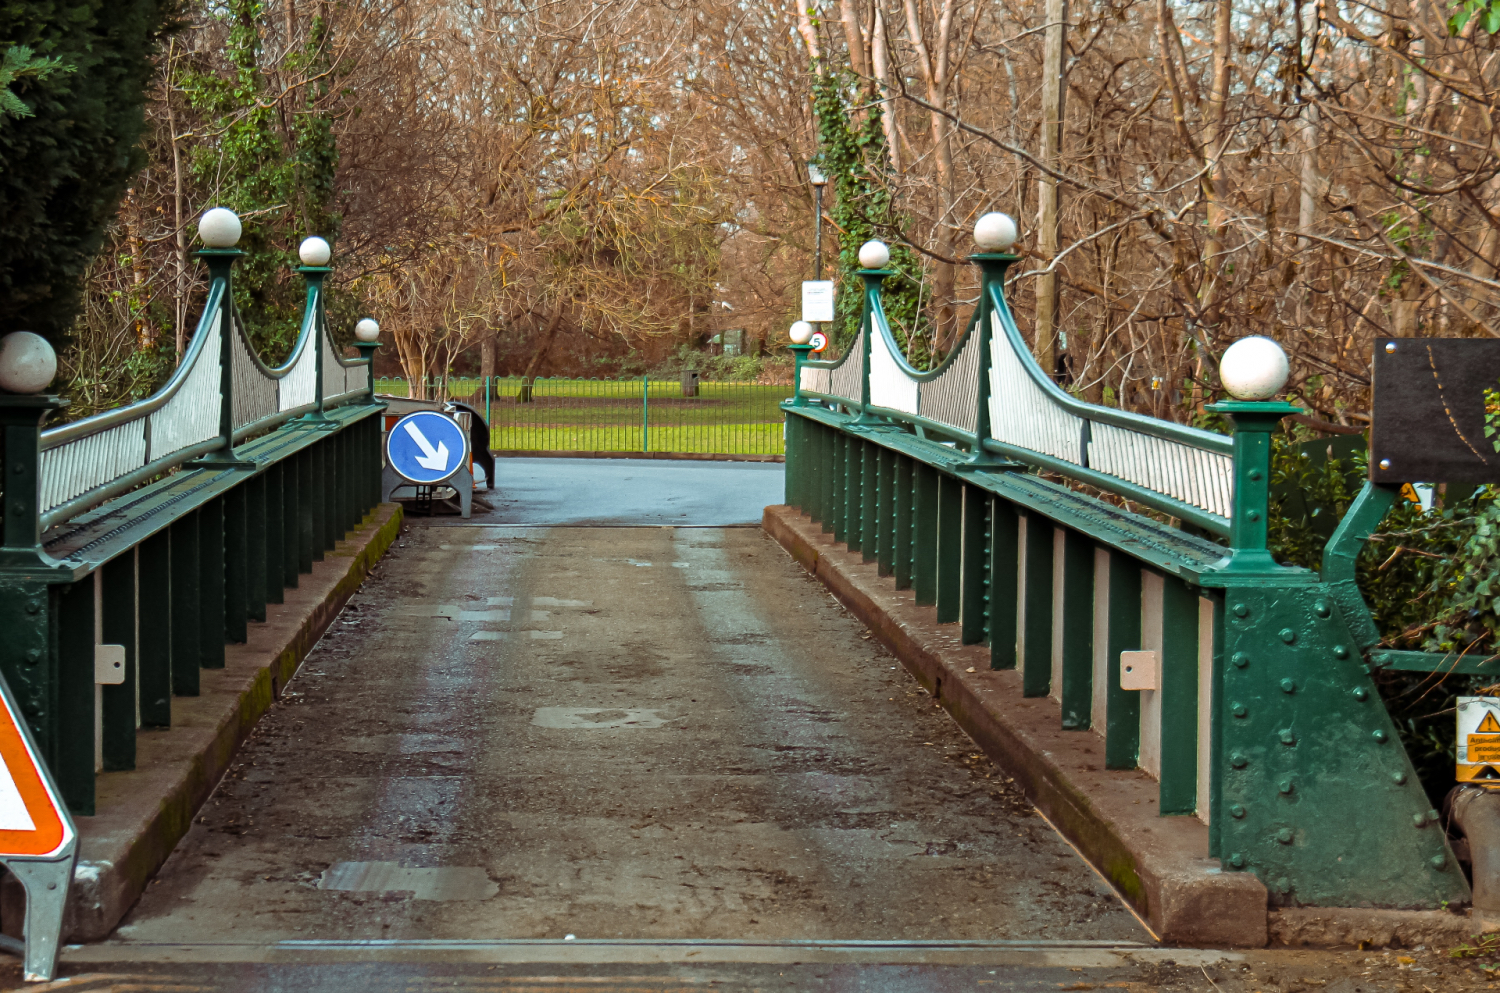 Ornate metal bridge with a blue arrow road sign, leading to other roads ahead